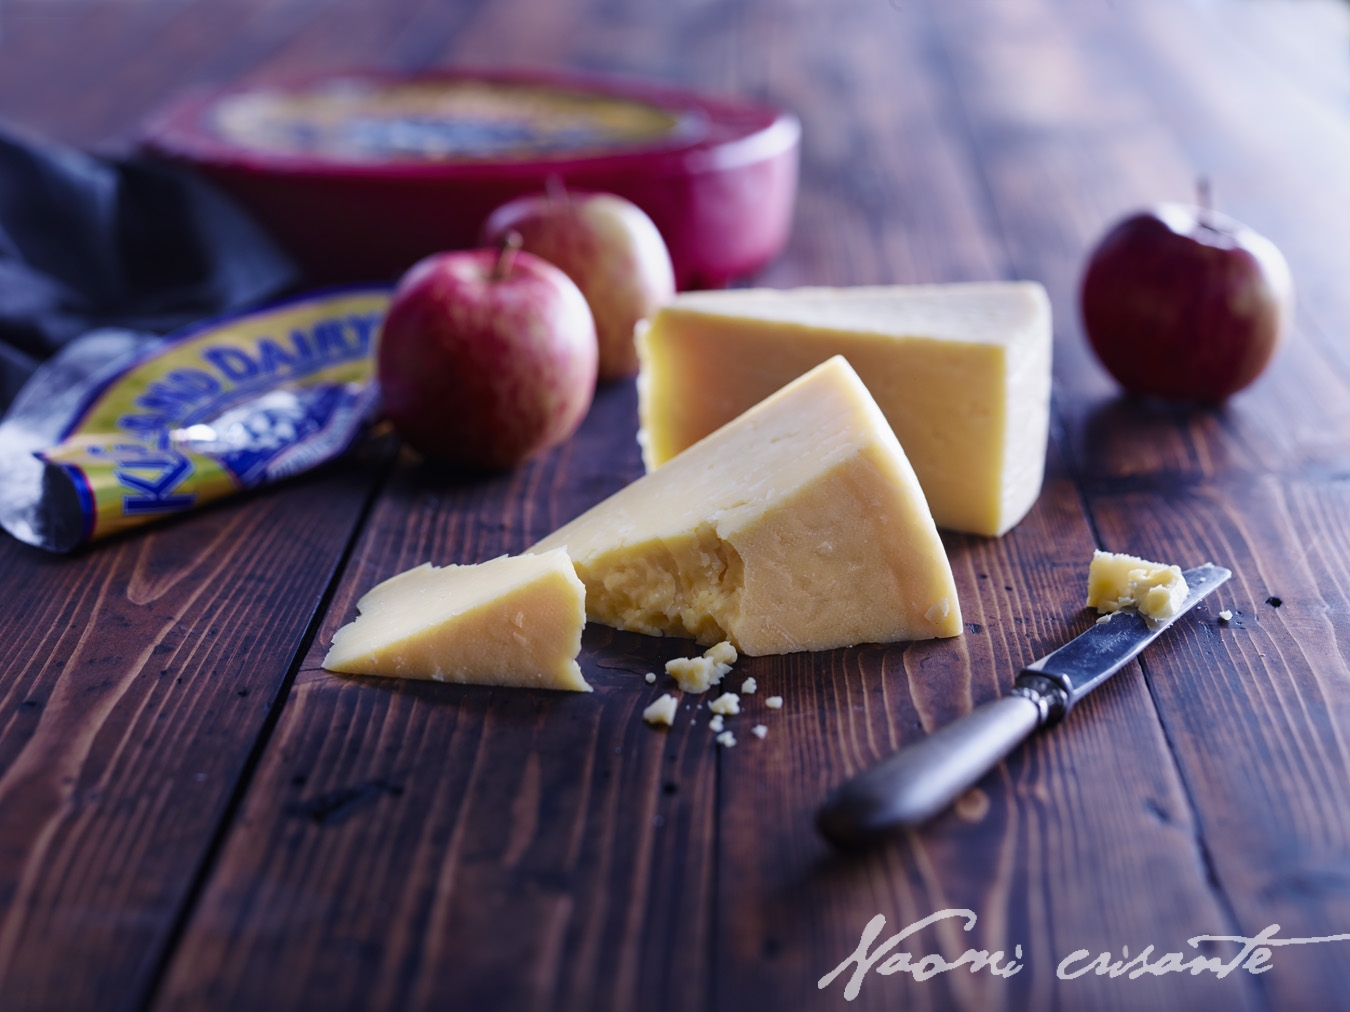 Surprise Bay Cheddar and Red Apples